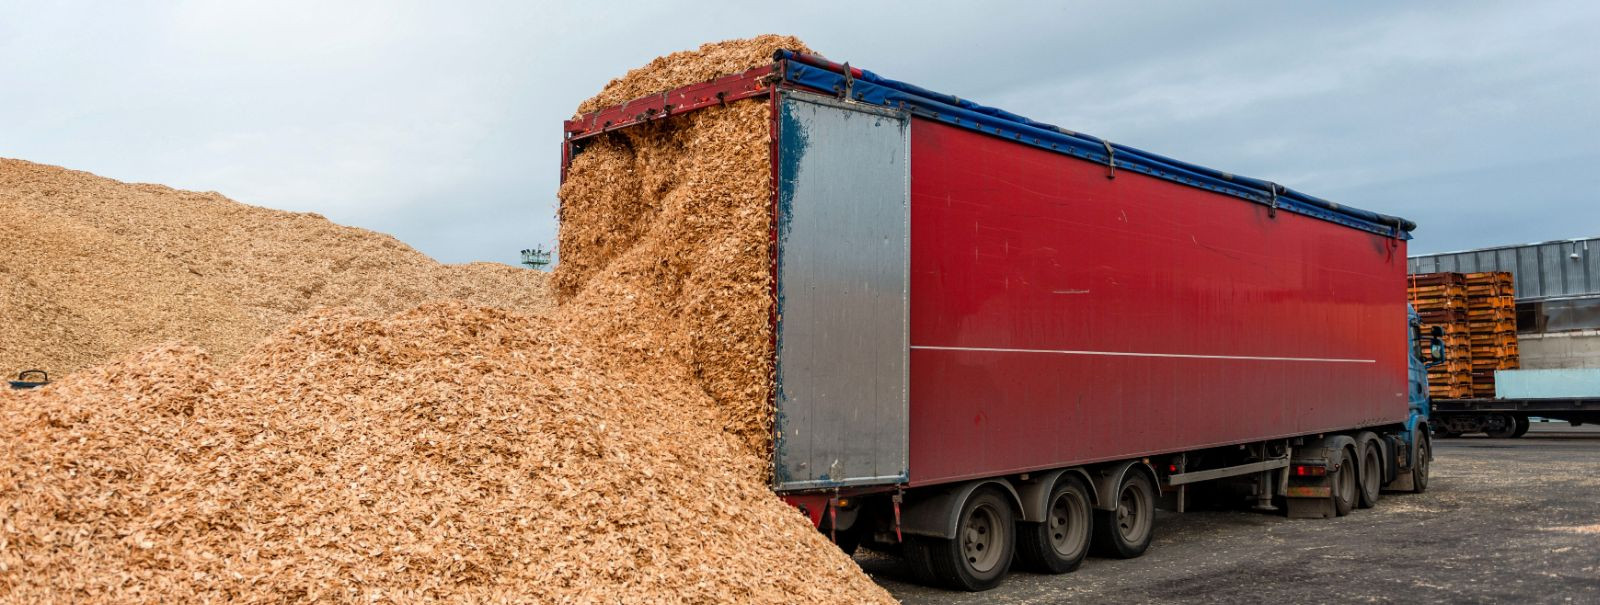 Wood chips are a byproduct of forestry and woodworking industries, commonly used as a biomass fuel, mulch in landscaping, raw material in paper production, and 